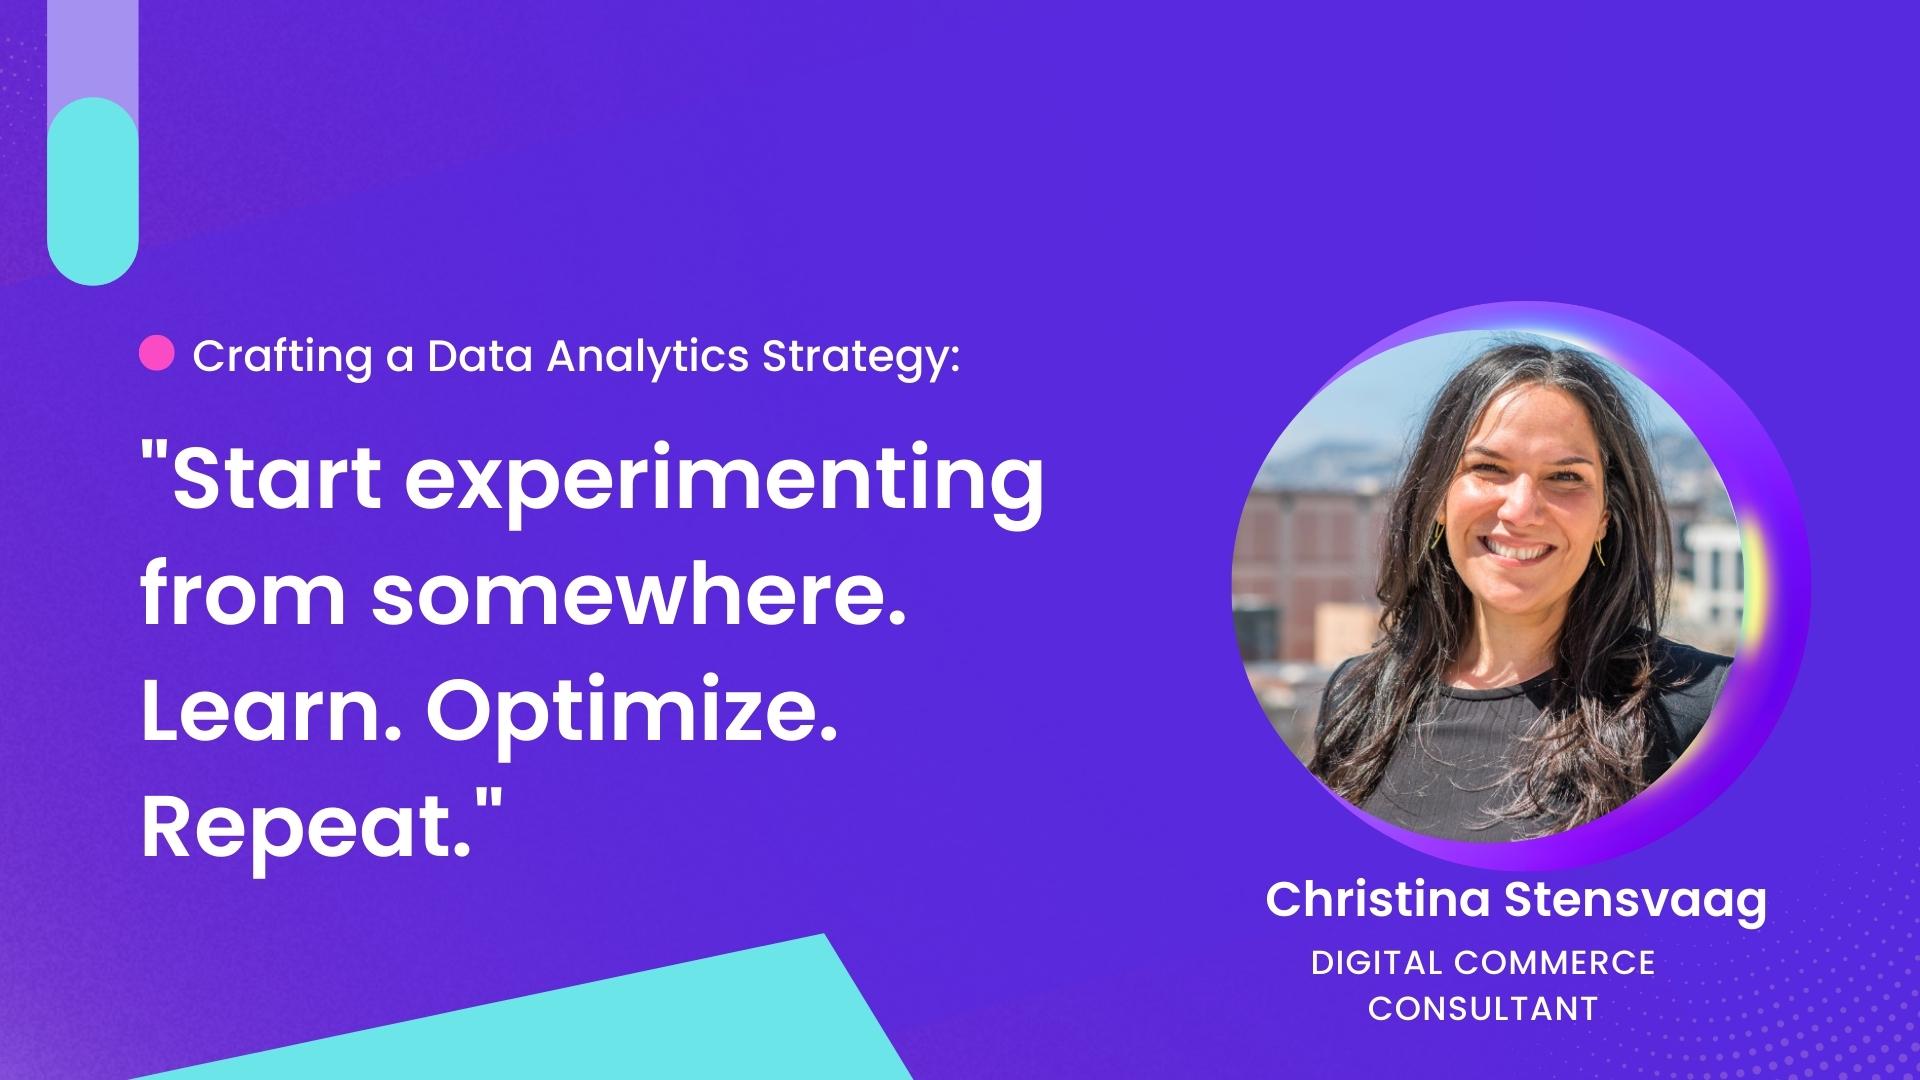 Quote on data analytics for eCommerce from expert Christina Stensvaag